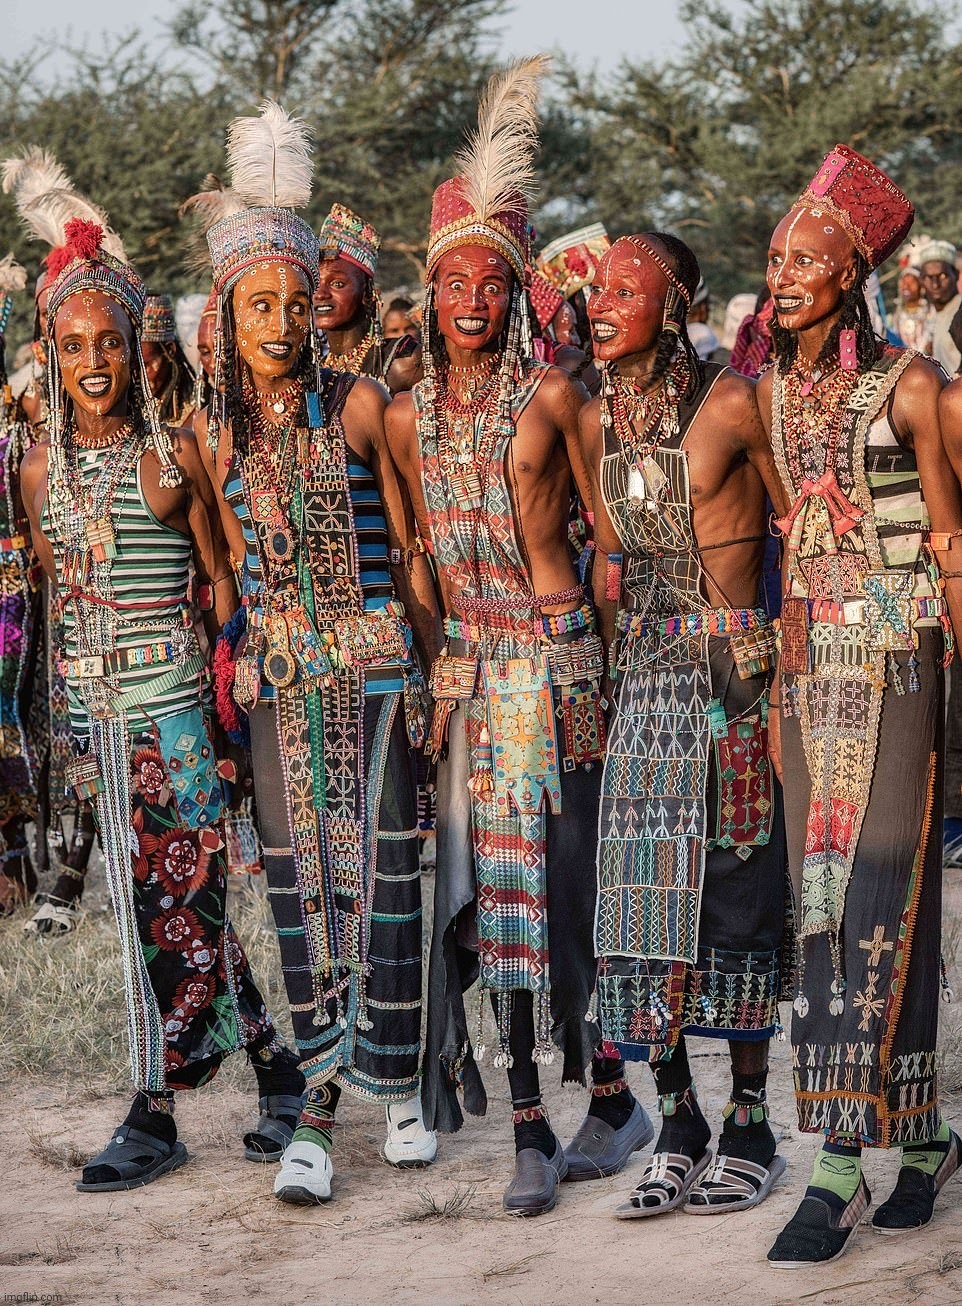 Wodaabe  at their Gerewol festival in Chad | image tagged in wodaabe,wodaabe gerewol festival in chad,gender | made w/ Imgflip meme maker